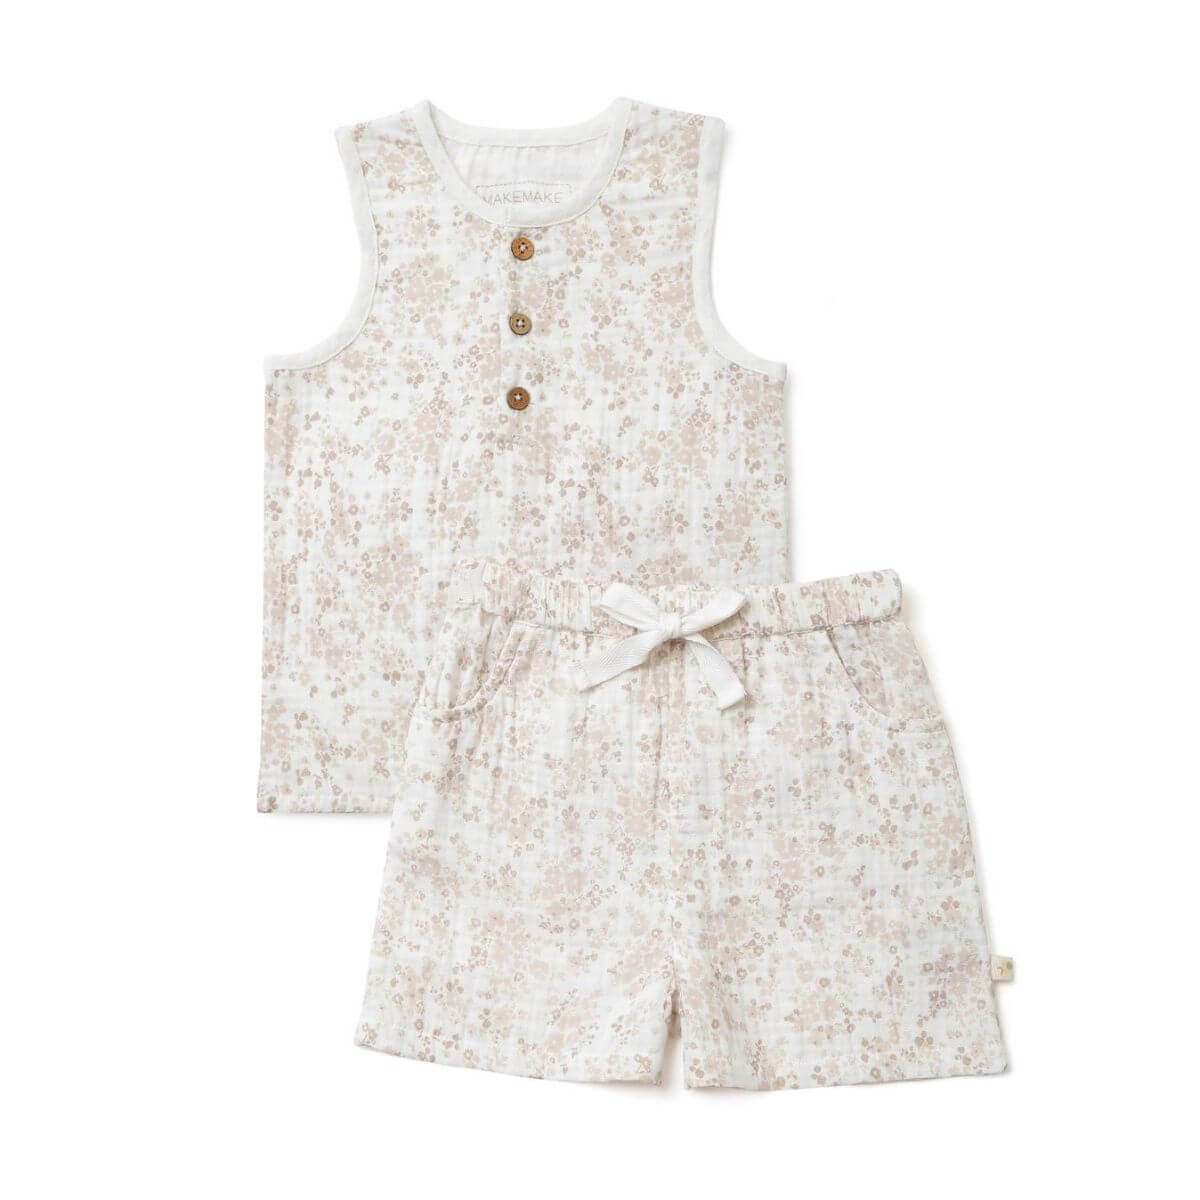 Organic Toddler Outfit / Tank & Shorts Set - Floral Summer Bloom